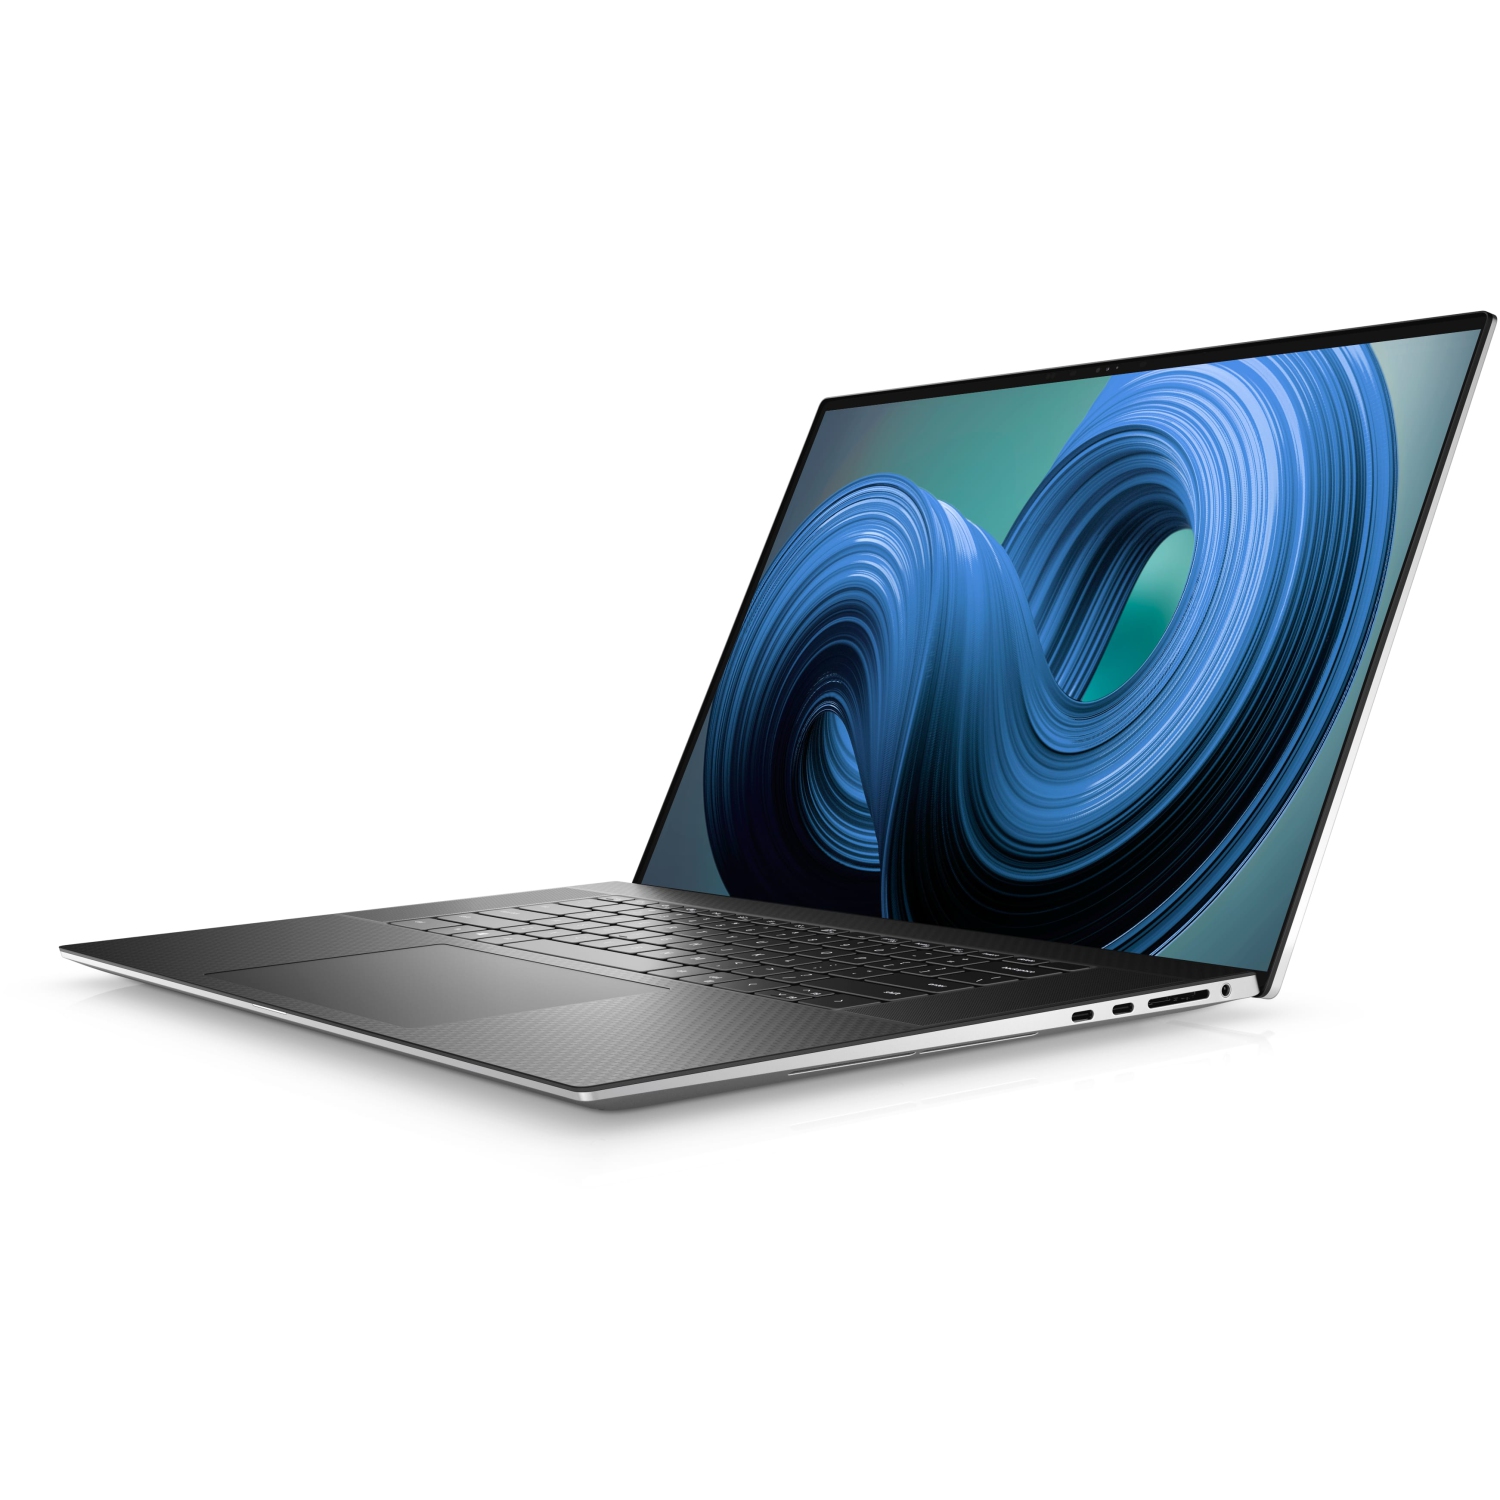 Refurbished (Excellent) – Dell XPS 9720 Laptop (2022) | 17" 4K Touch | Core i7 - 512GB SSD - 16GB RAM - RTX 3050 | 14 Cores @ 4.7 GHz - 12th Gen CPU